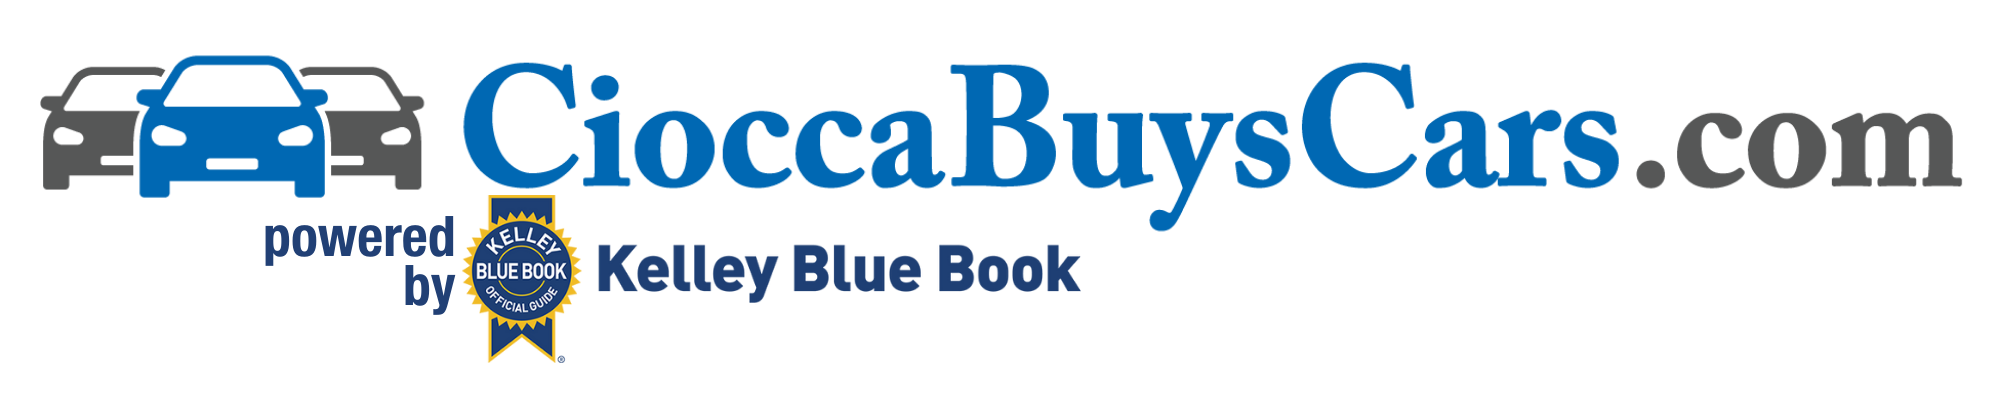 Ciocca Buys Cars powered by Kelly Blue Book